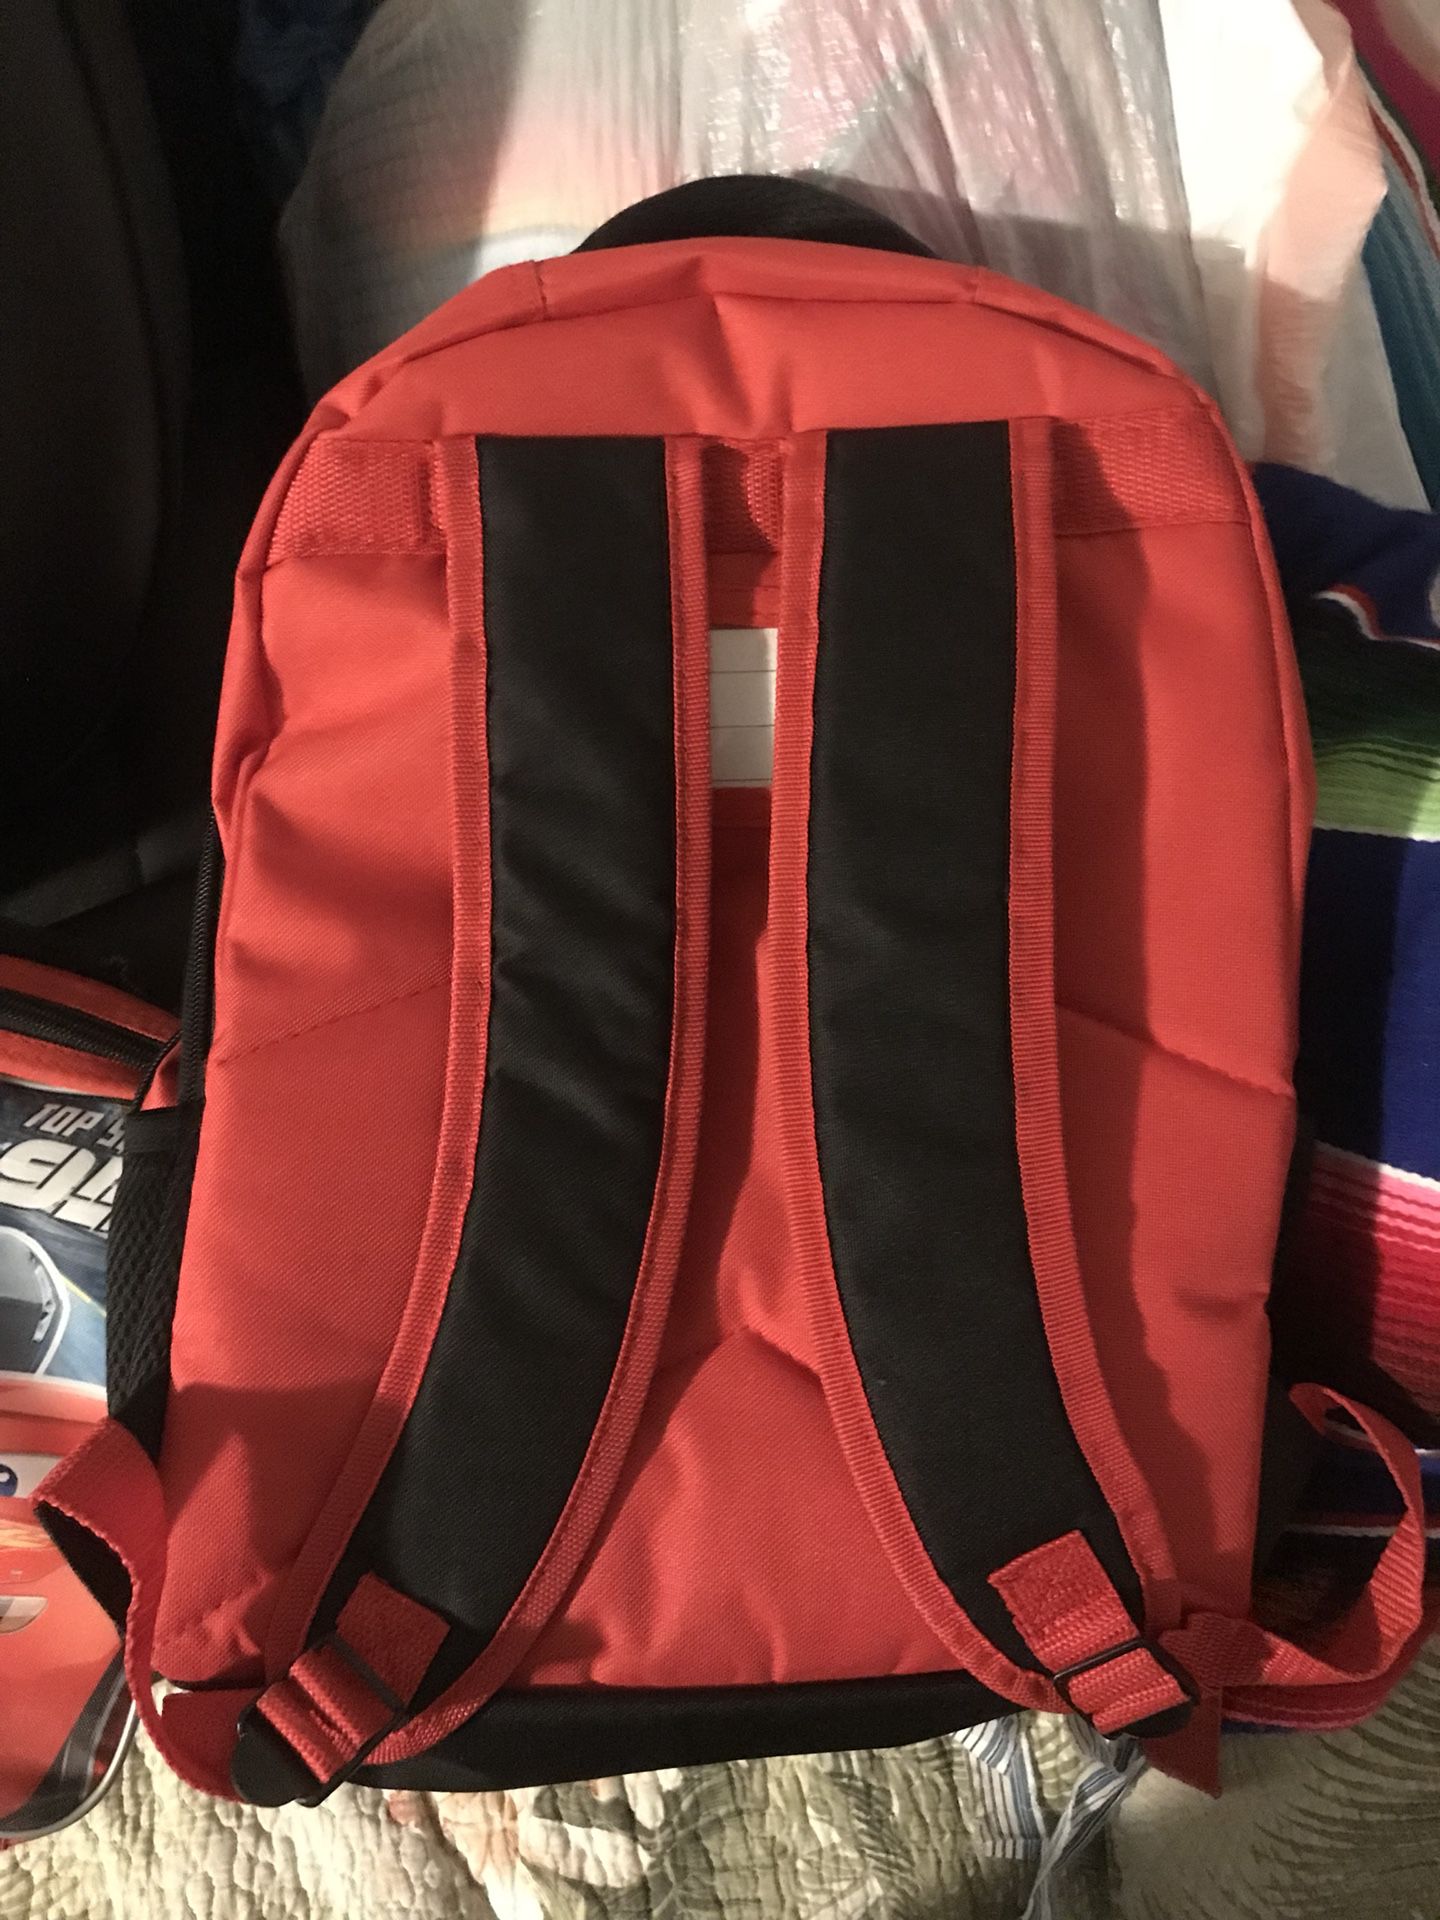 MultiSac Backpack for Sale in Vancouver, WA - OfferUp